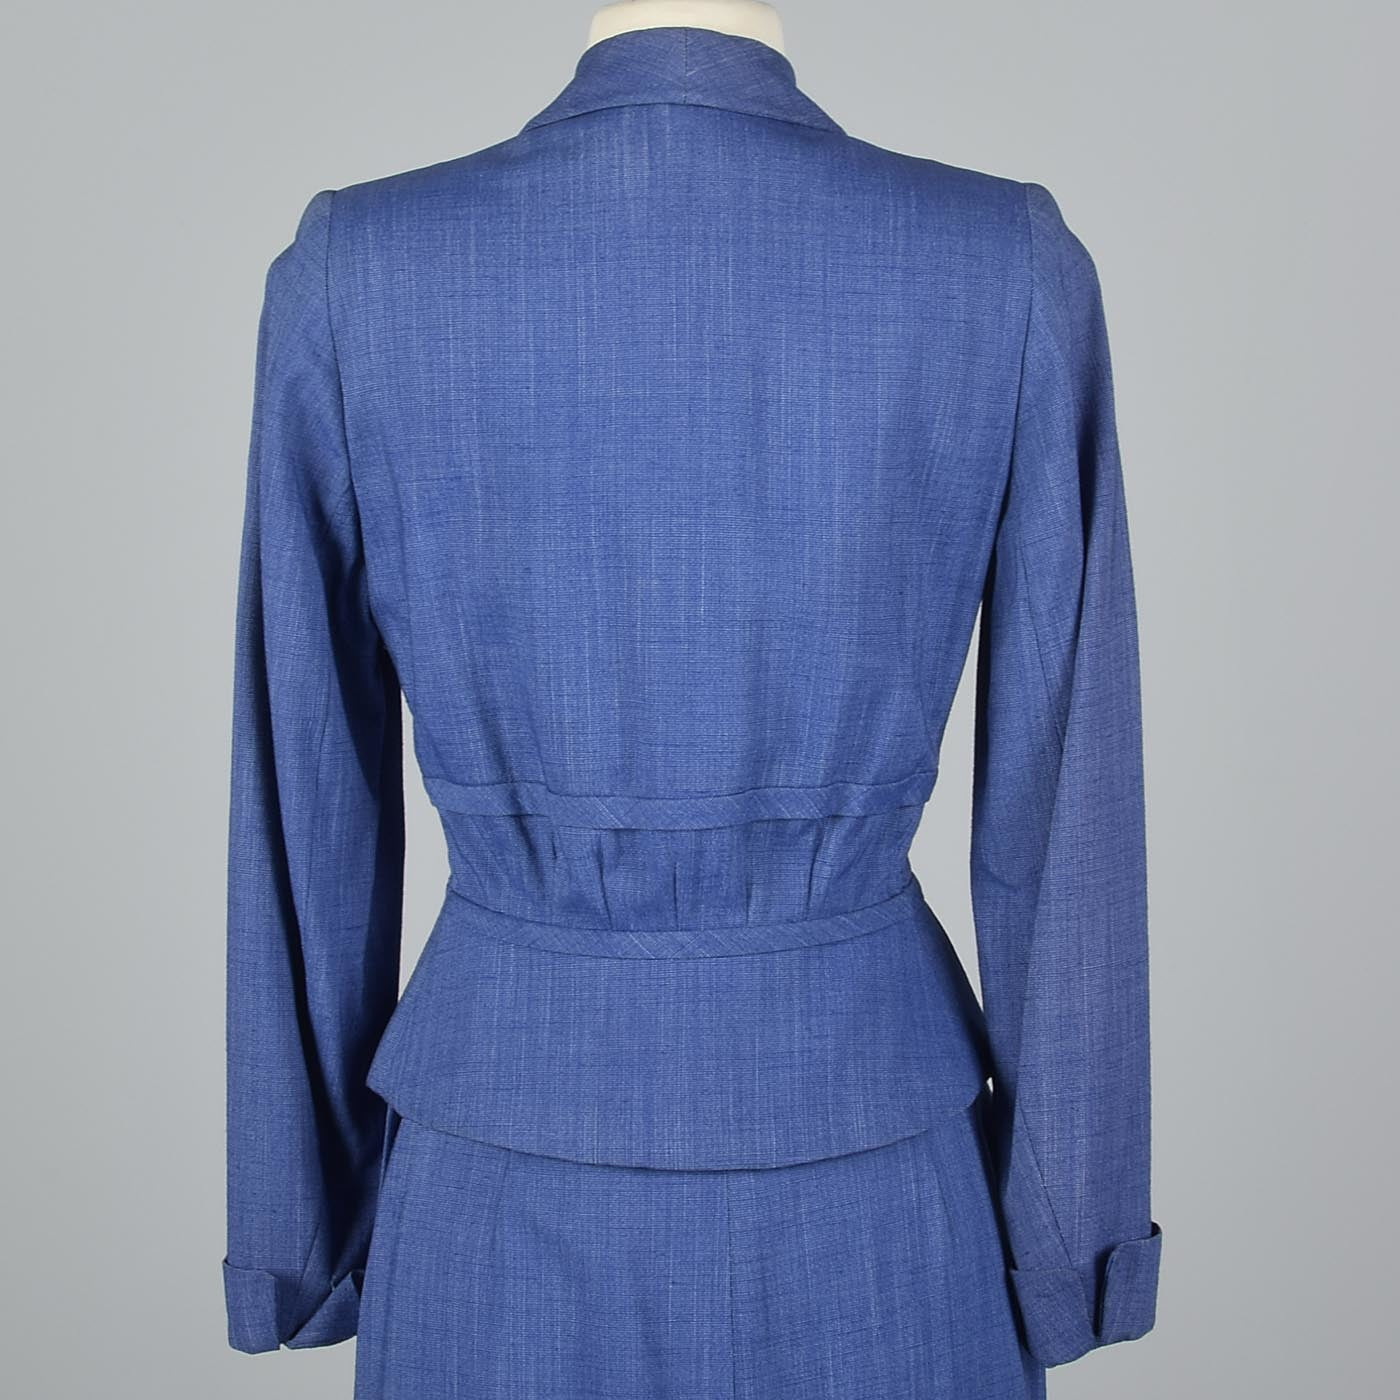 1950s Hourglass Blue Skirt Suit